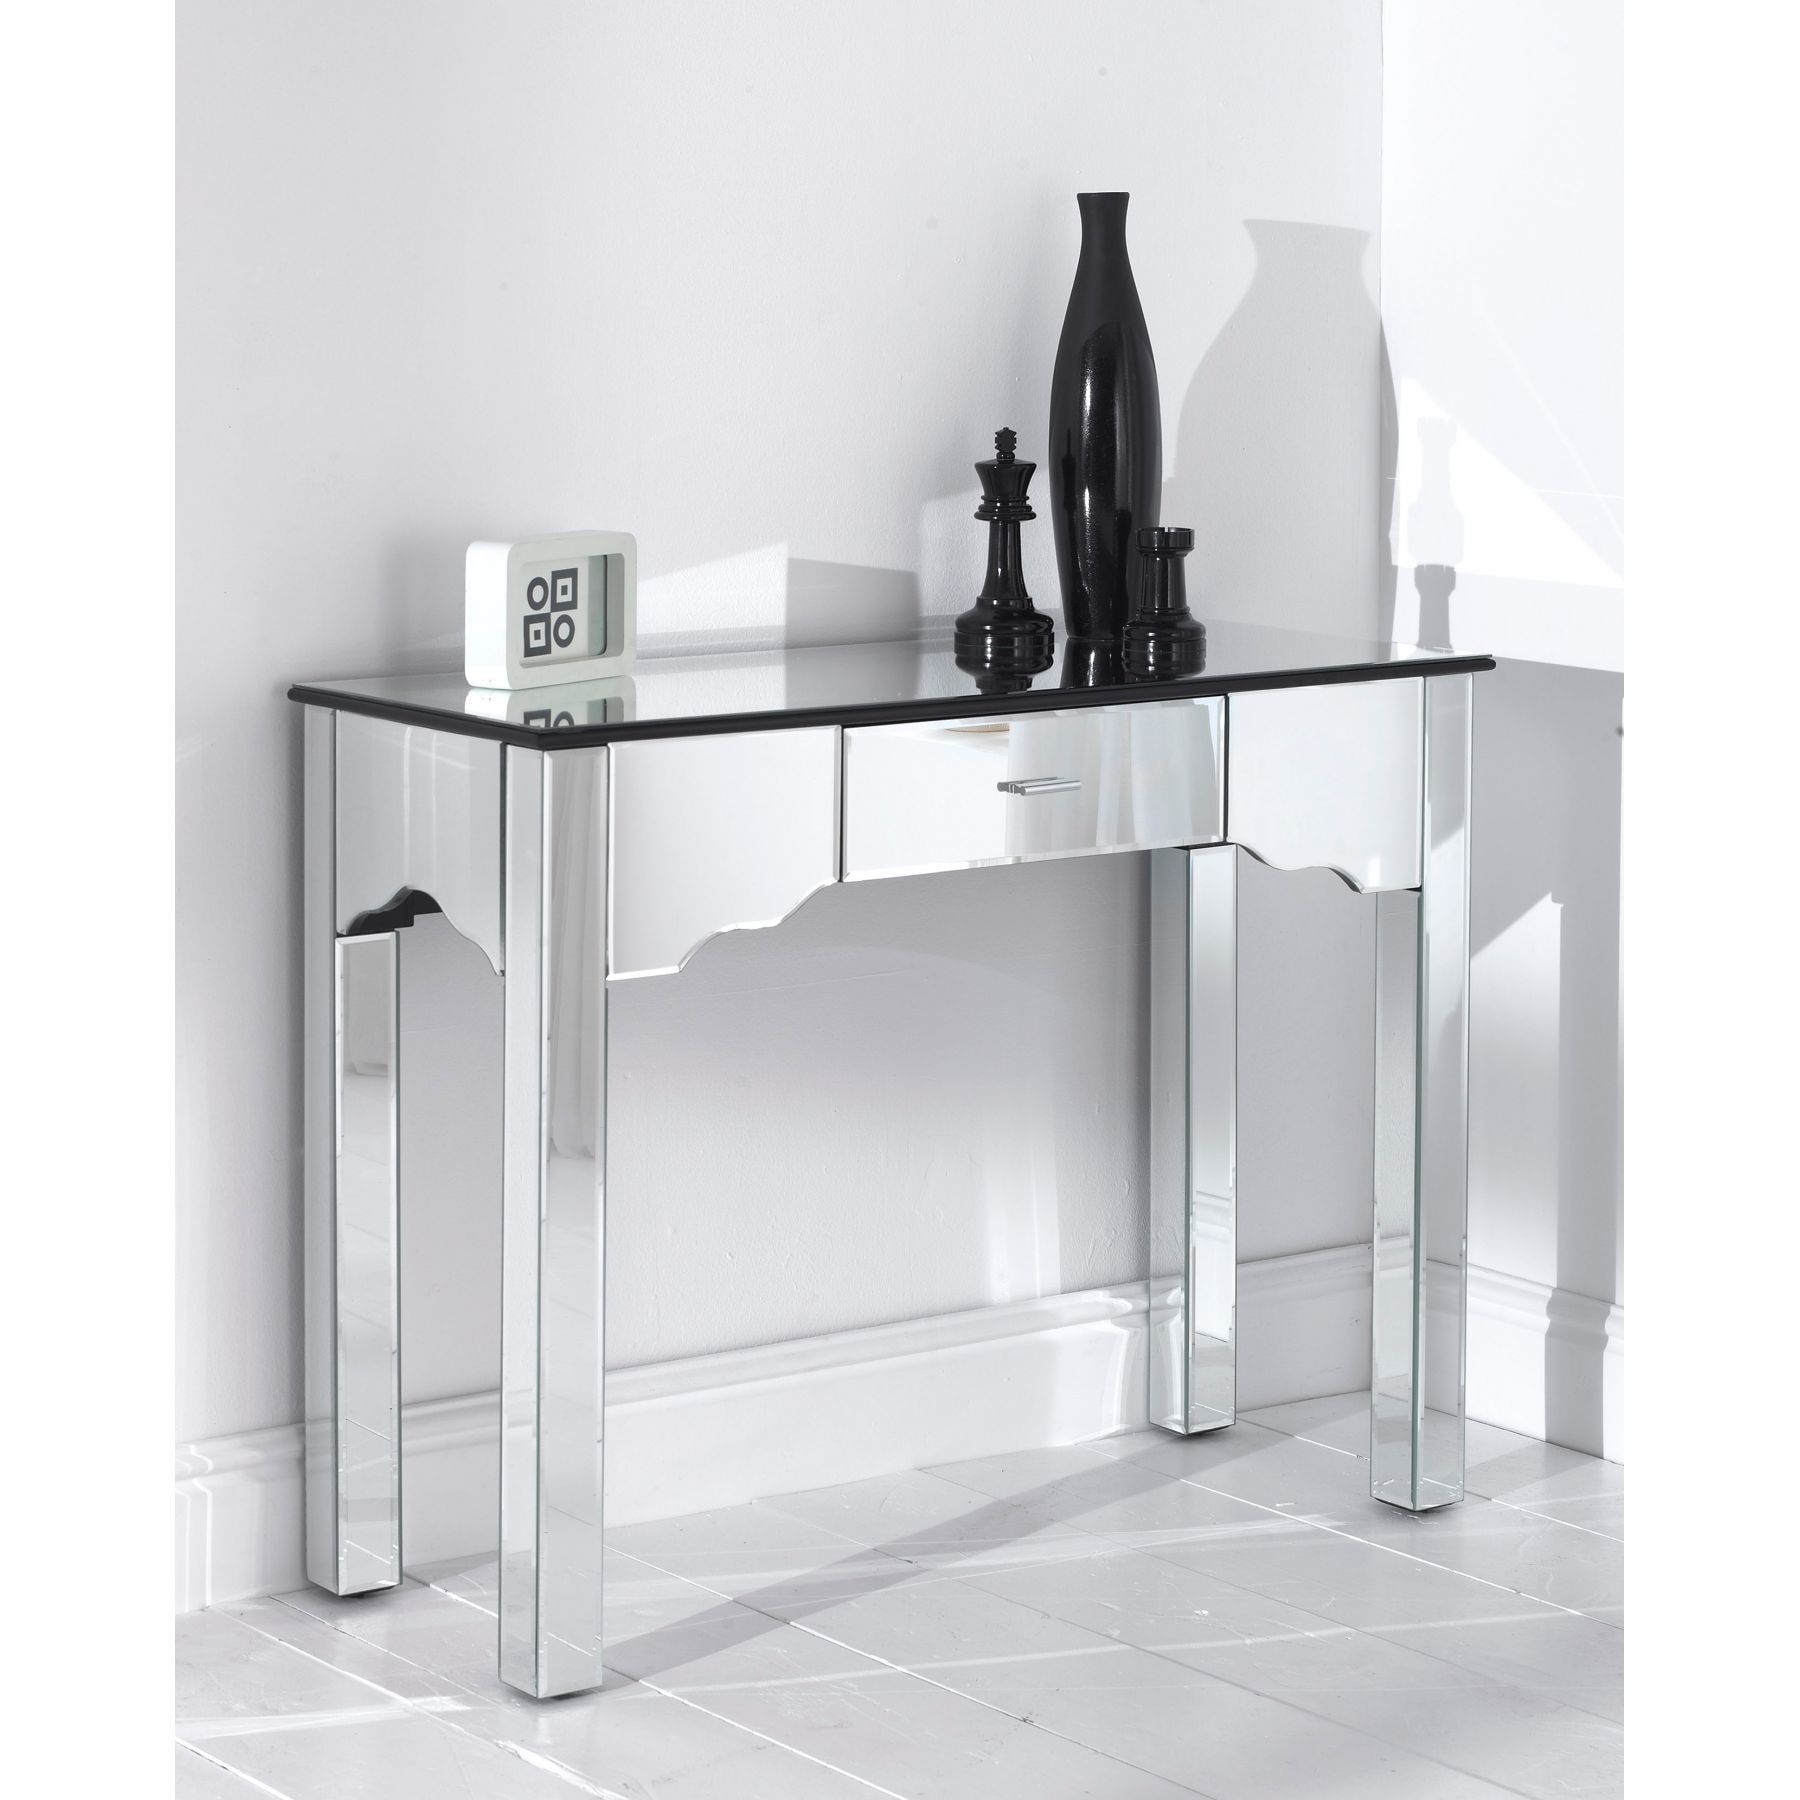 Mirrored Romano Console Table Throughout Large Modern Console Tables (View 16 of 20)